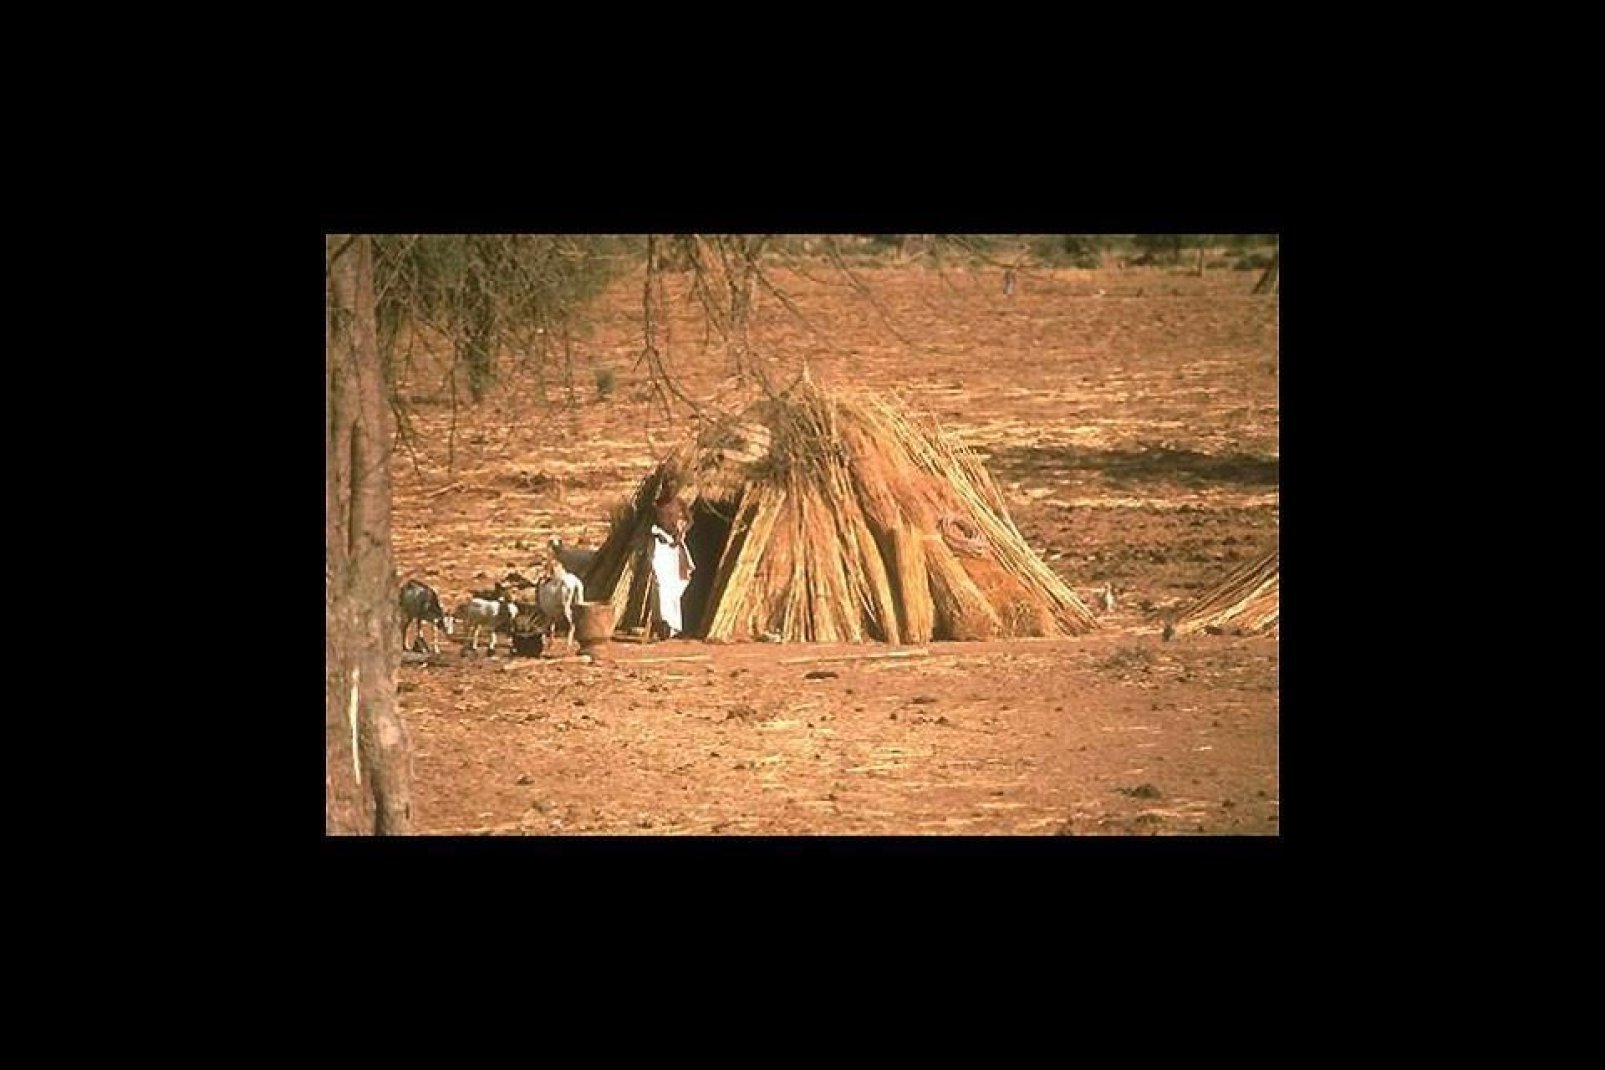 A traditional dwelling in this region of southwest Mali.